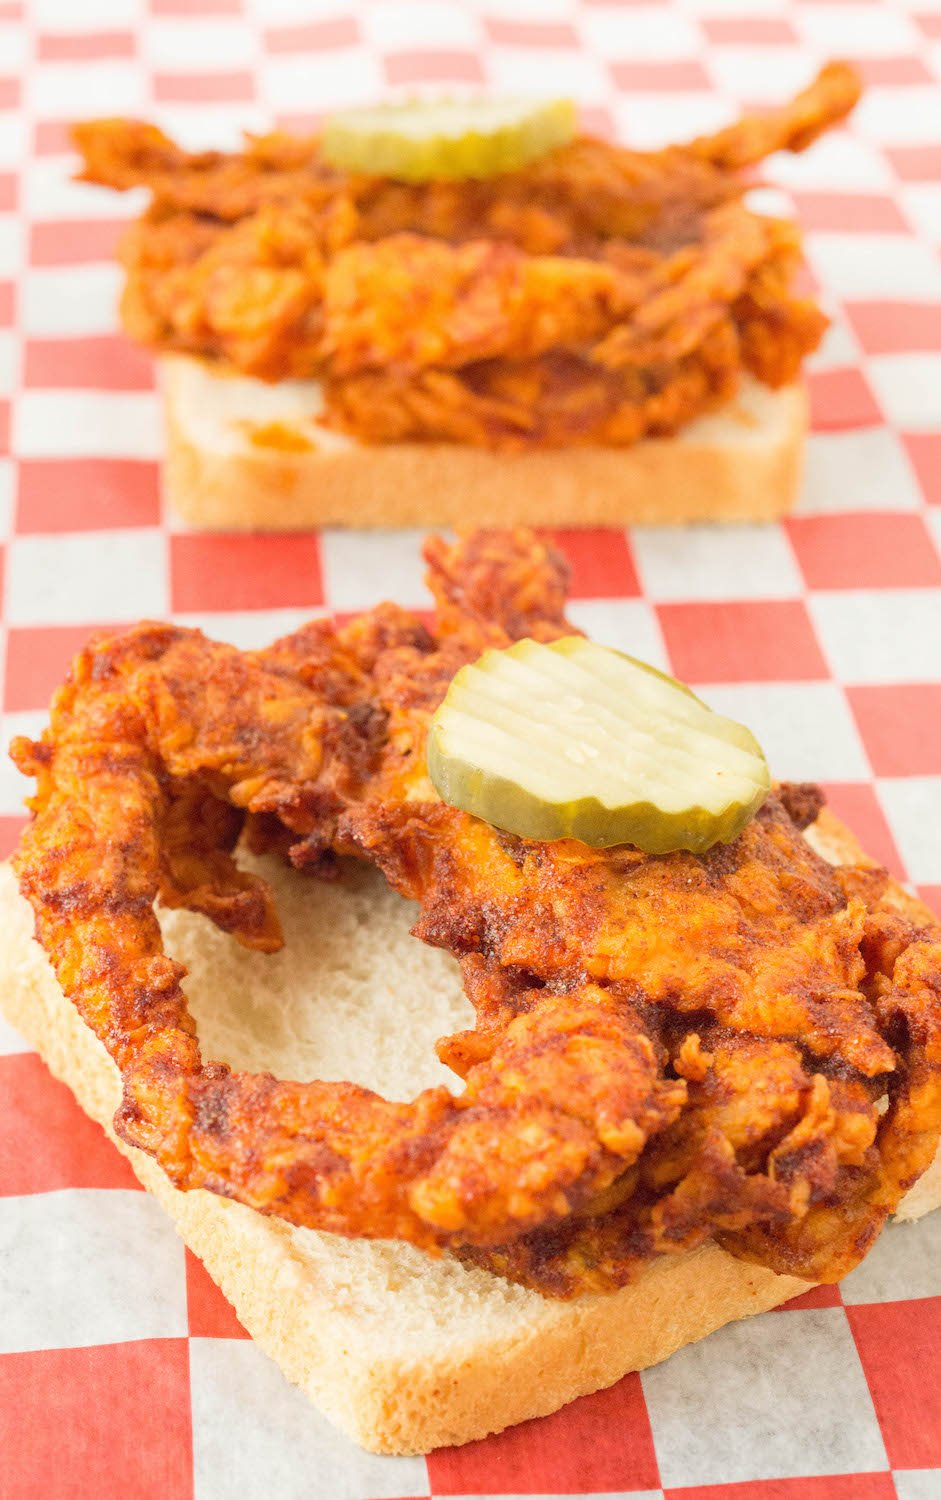 A fun twist on the popular "Nashville Hot Chicken", this fried Nashville Hot Soft-Shell Crab has become a spicy favorite of everyone who has tried it.